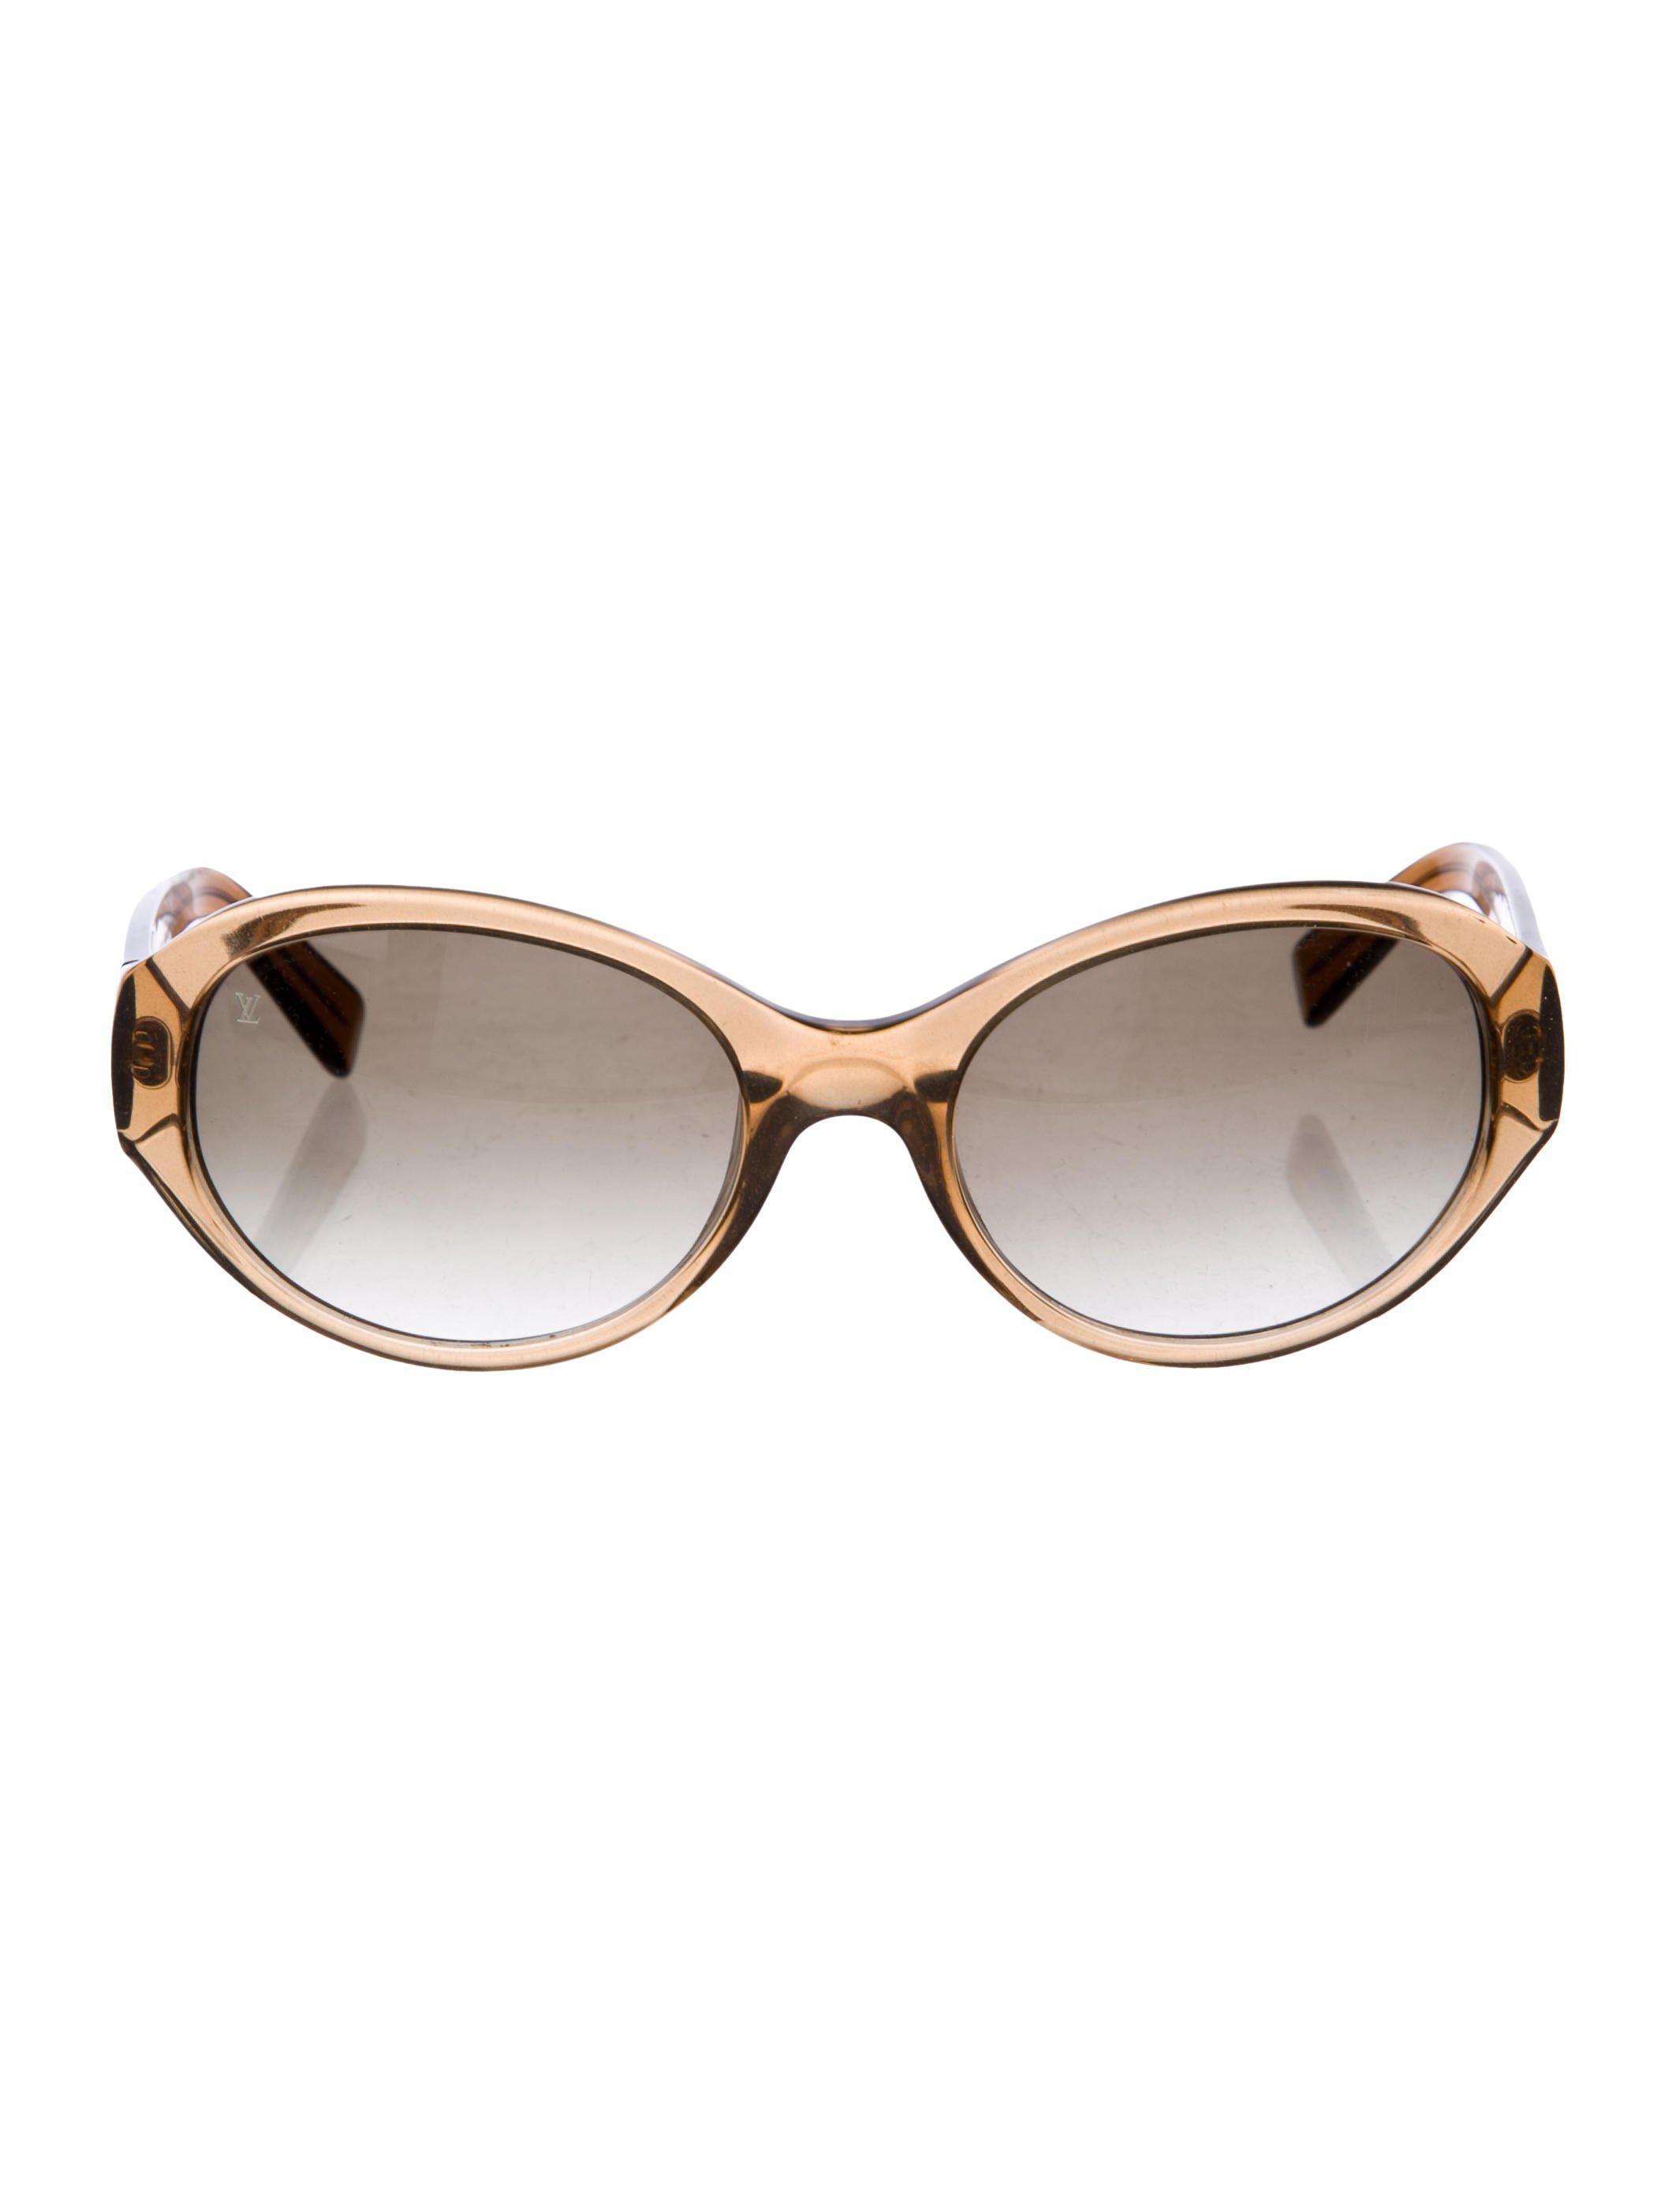 Lyst - Louis Vuitton Obsession Rond Sunglasses Brown in Brown